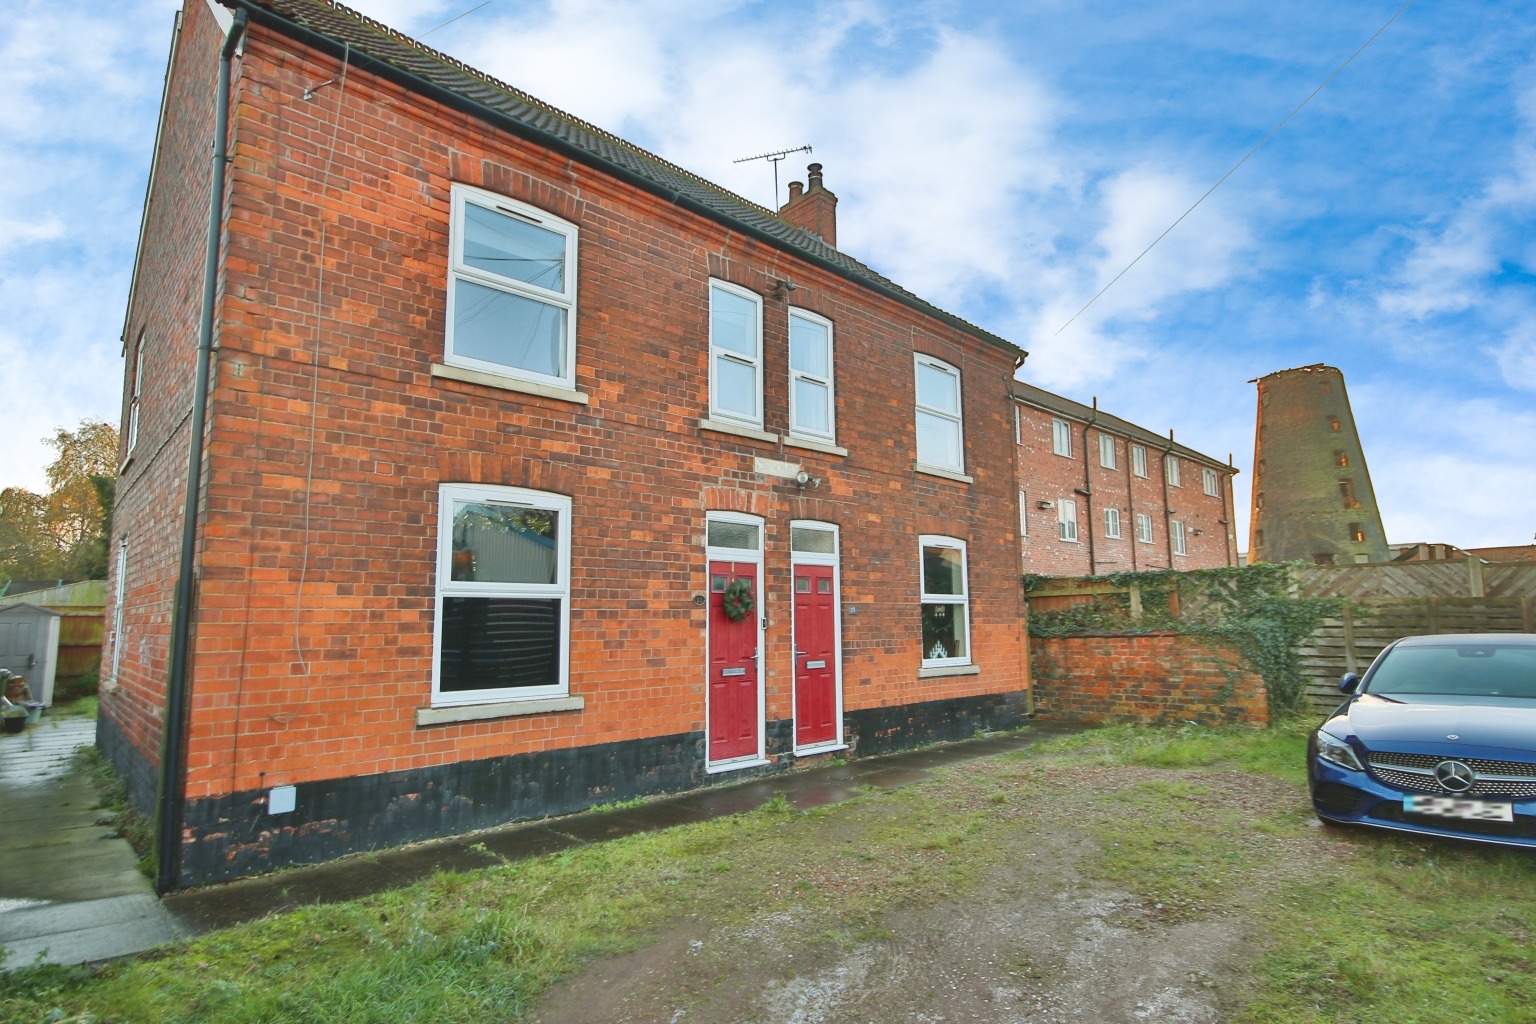 2 bed semi-detached house for sale in Hewson's Lane, Barton upon Humber - Property Image 1